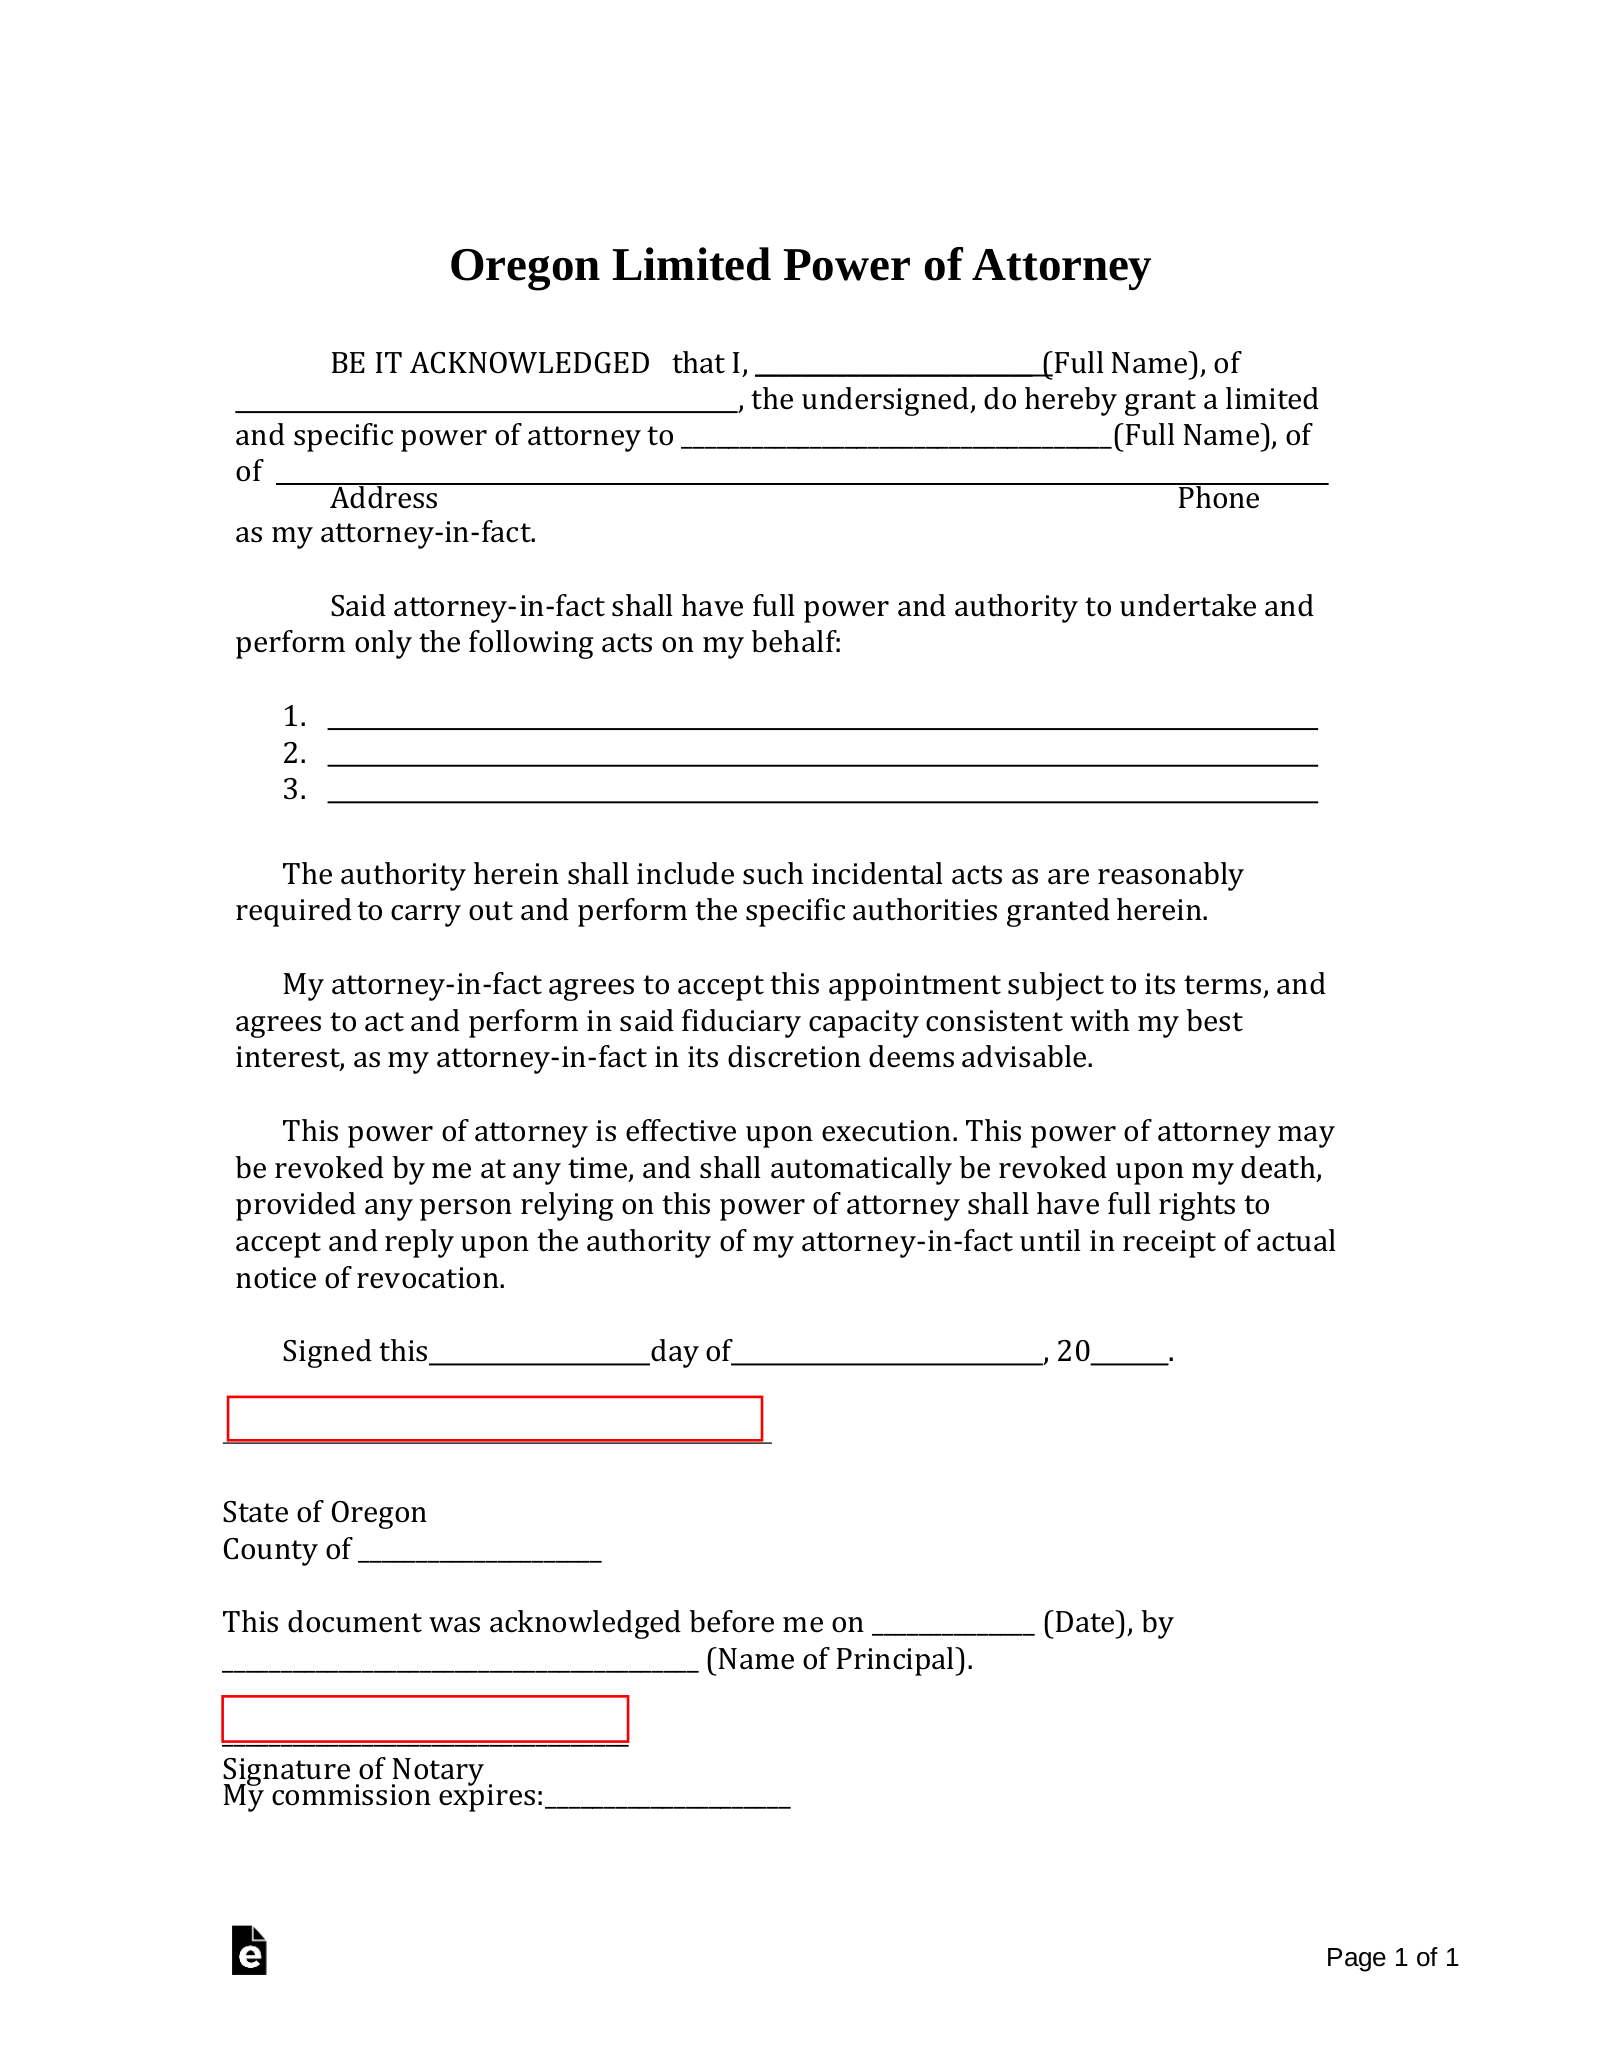 Oregon Limited Power of Attorney